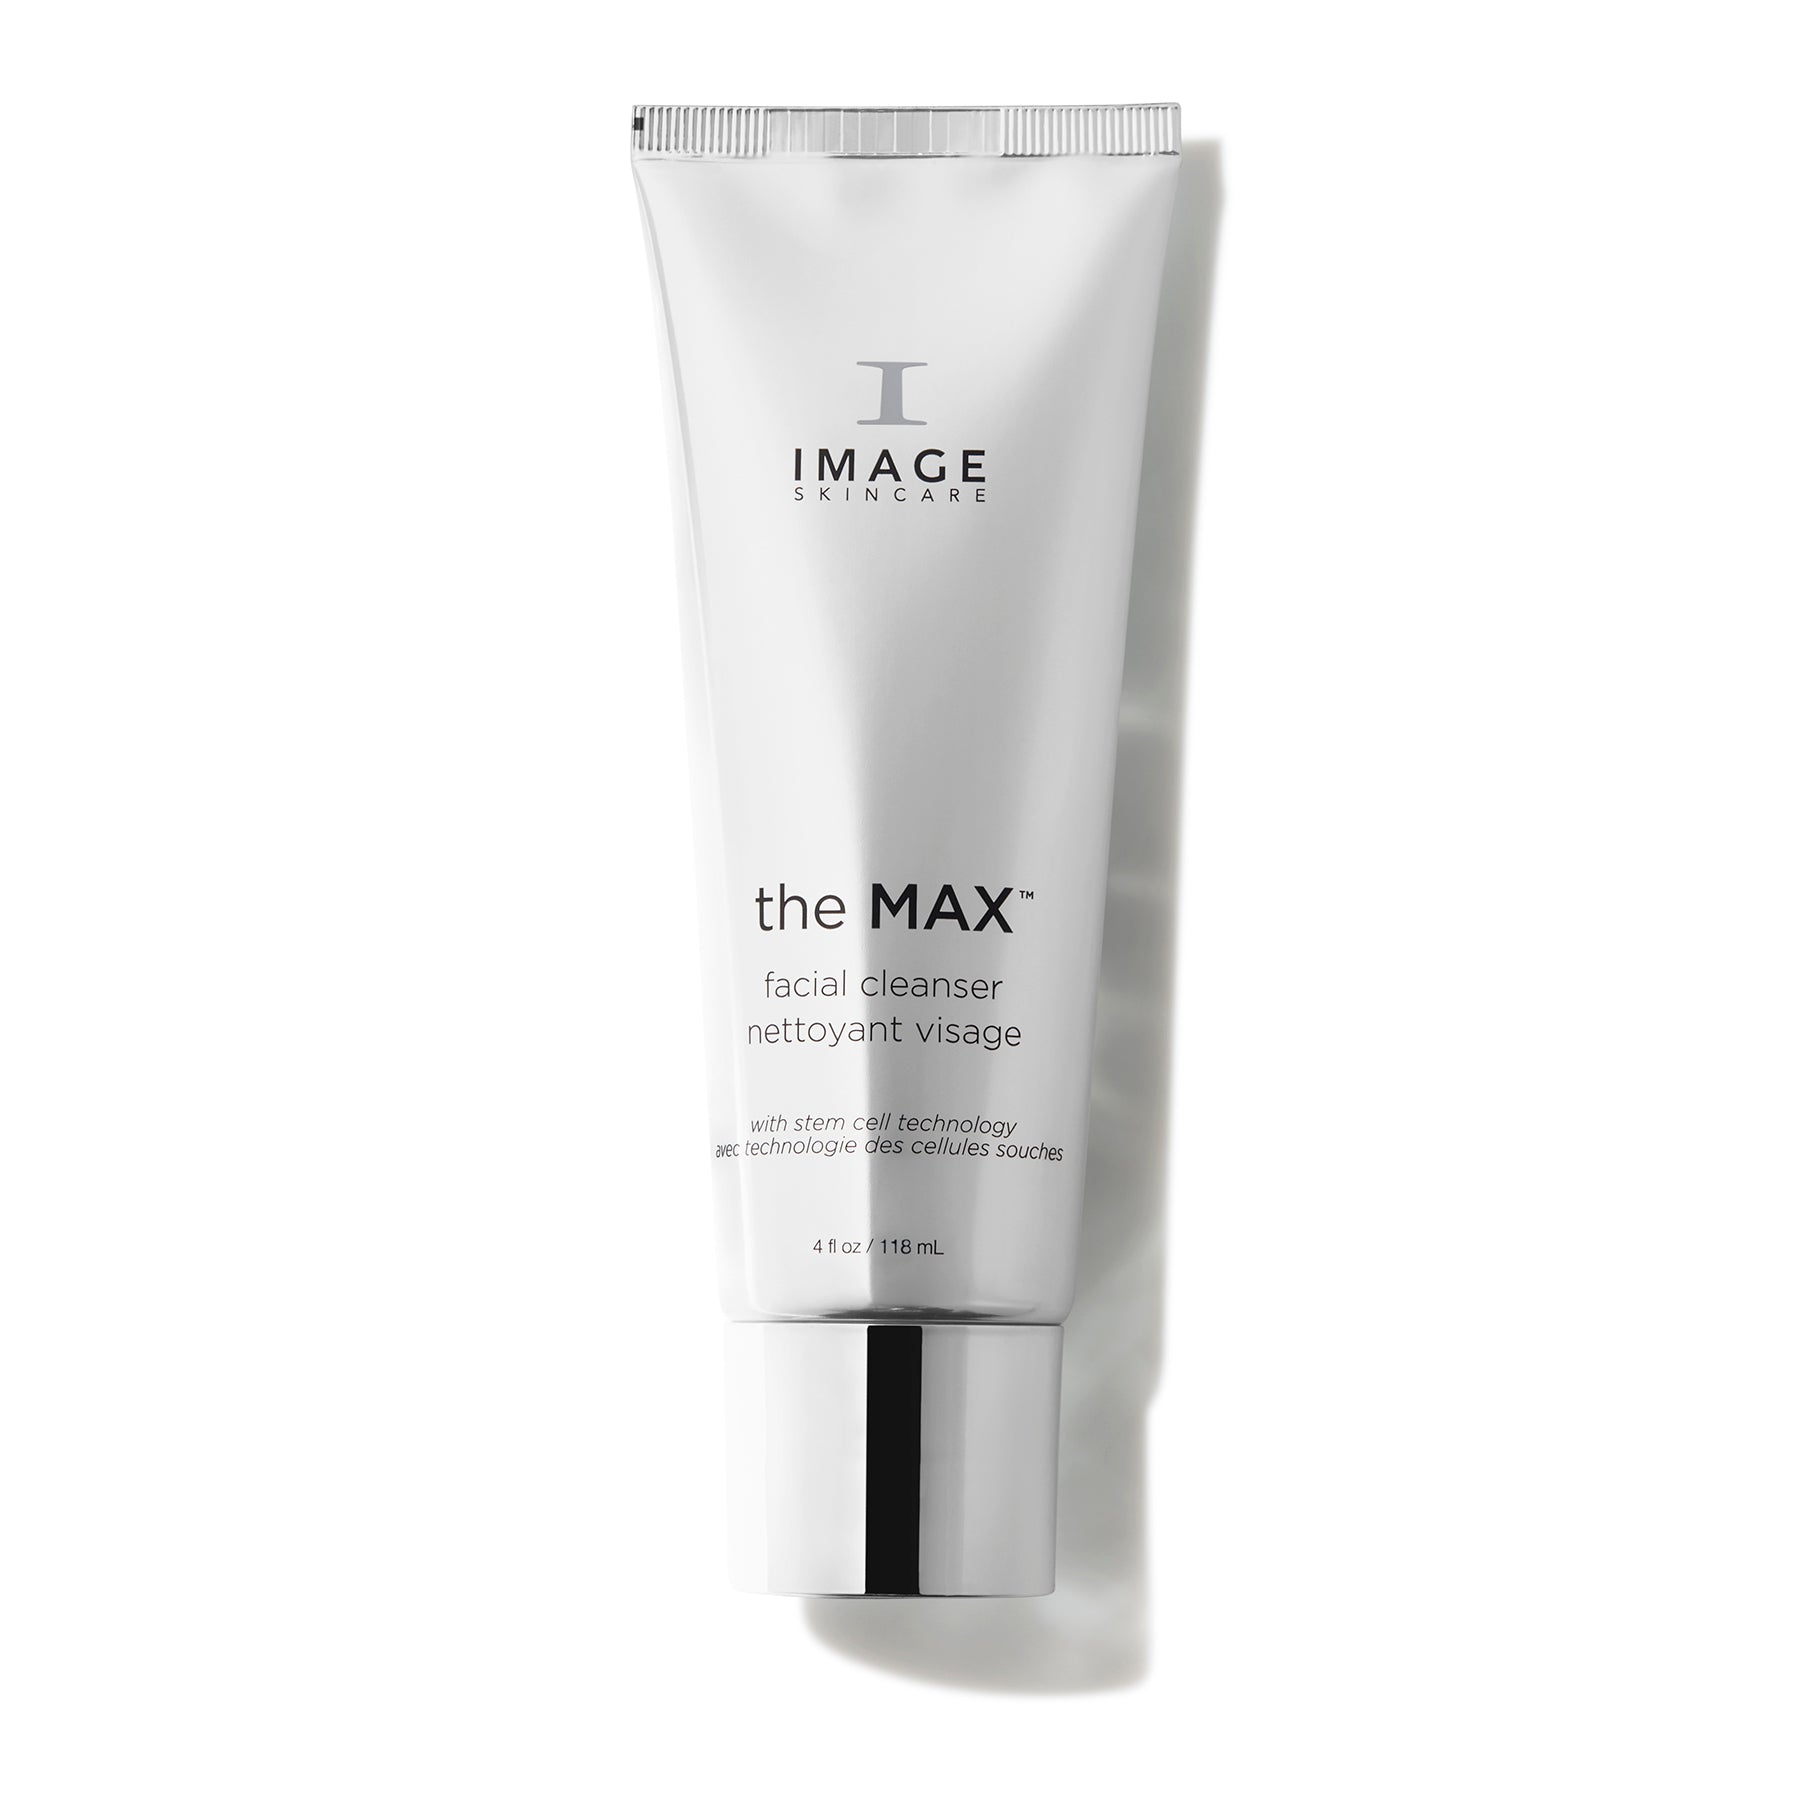 IMAGE Skincare the Max Facial Cleanser